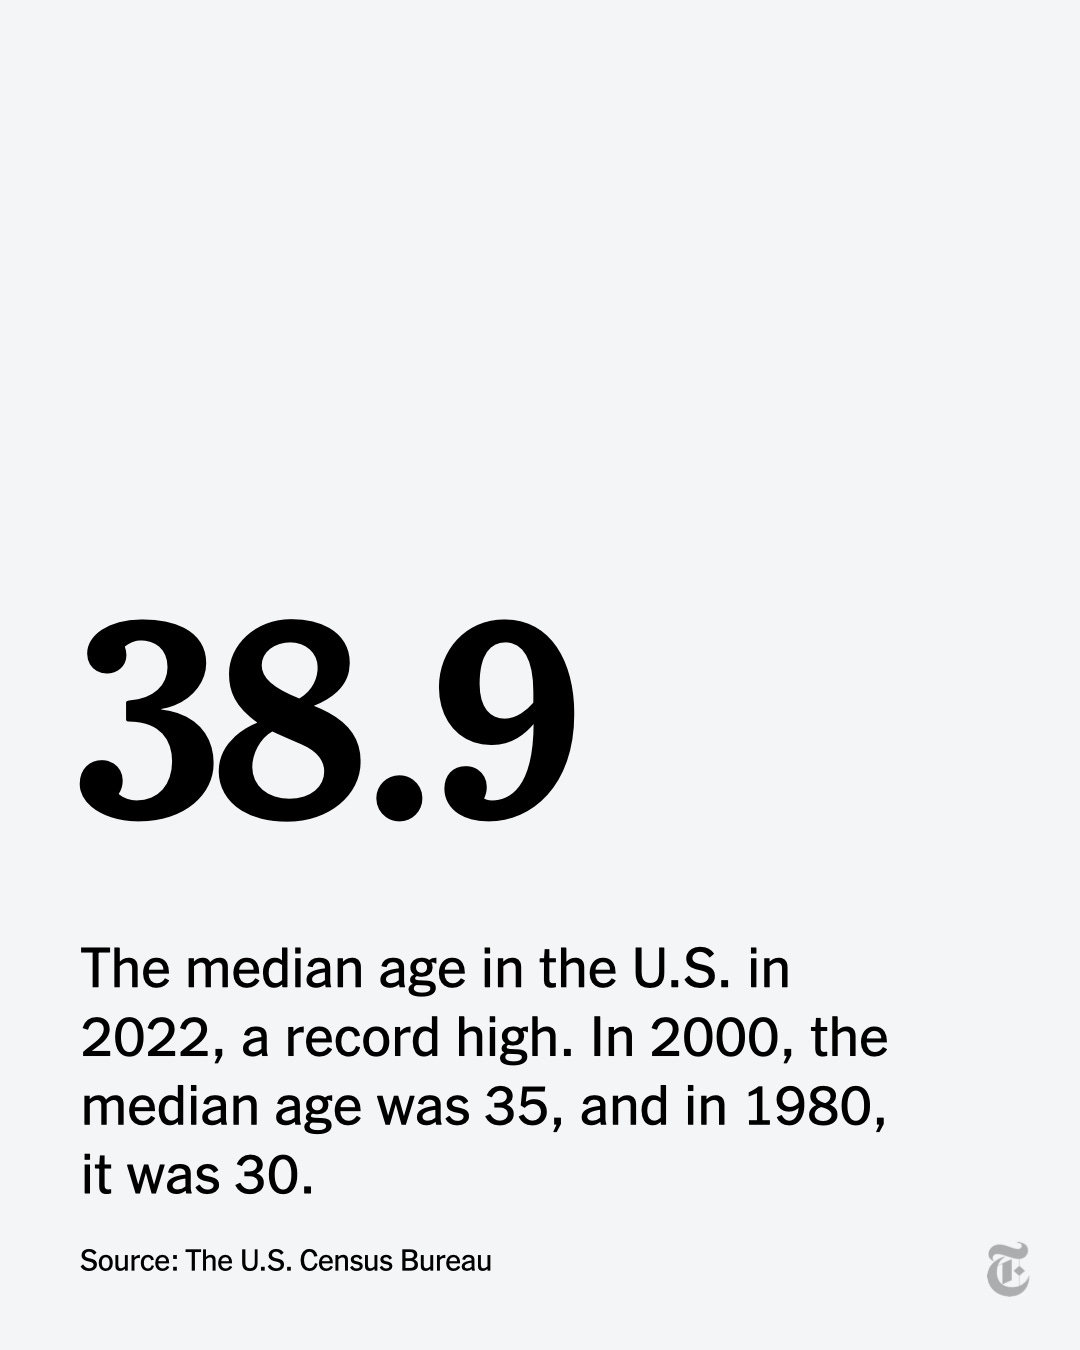 Text reads: "38.9. The median age in the U.S. in 2022, a record high. In 2000, the median age was 35, and in 1980, it was 30. Source: The U.S. Census Bureau."